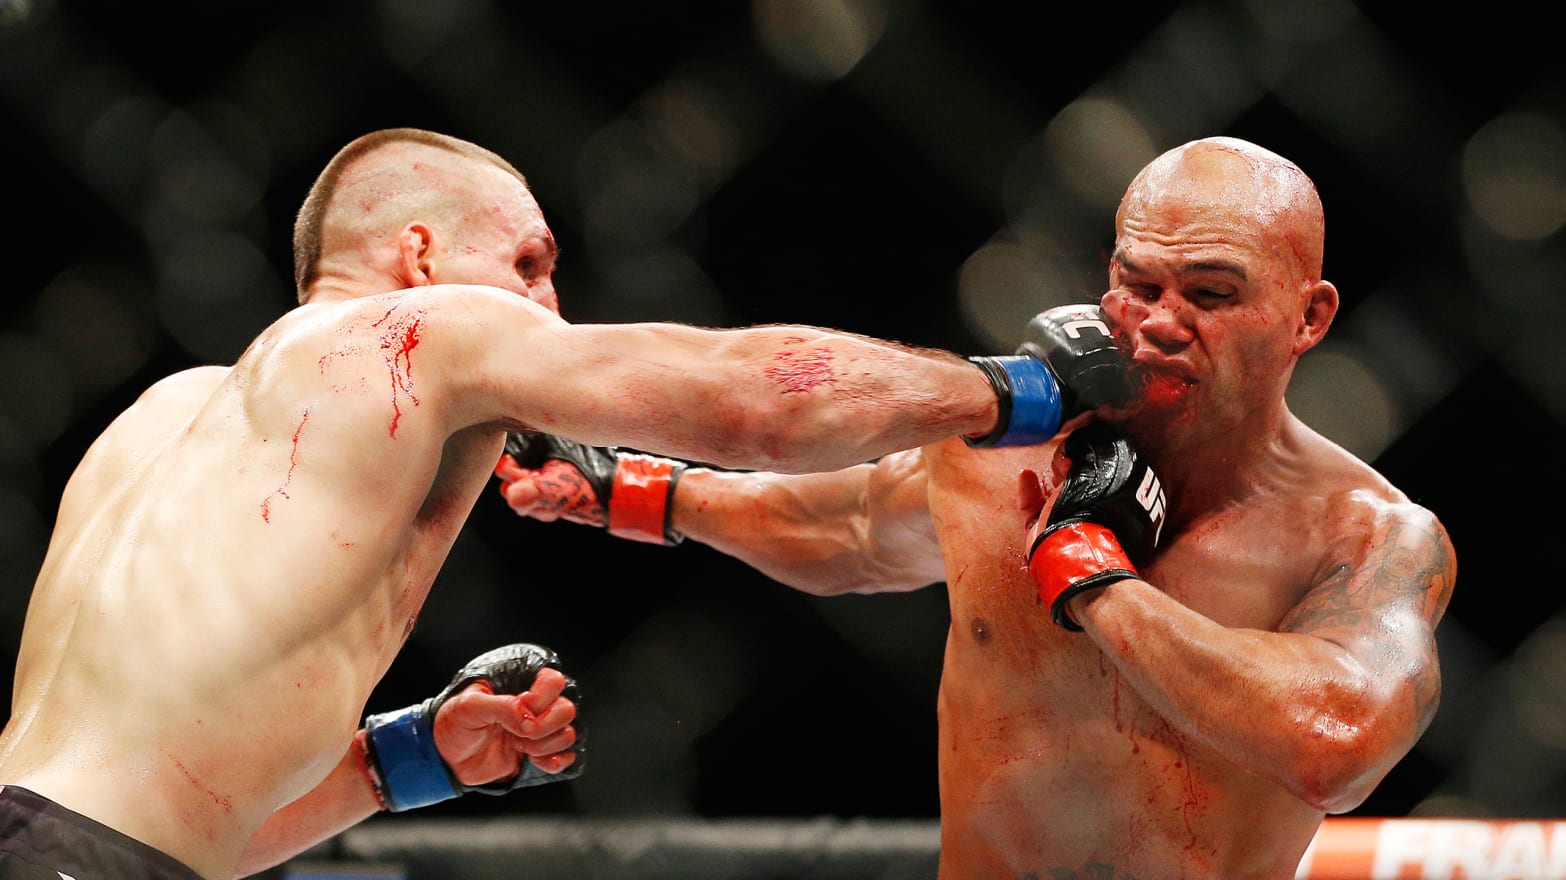 Hey UFC, Bring Back Brain to Fights Stop Trauma Bare-knuckle